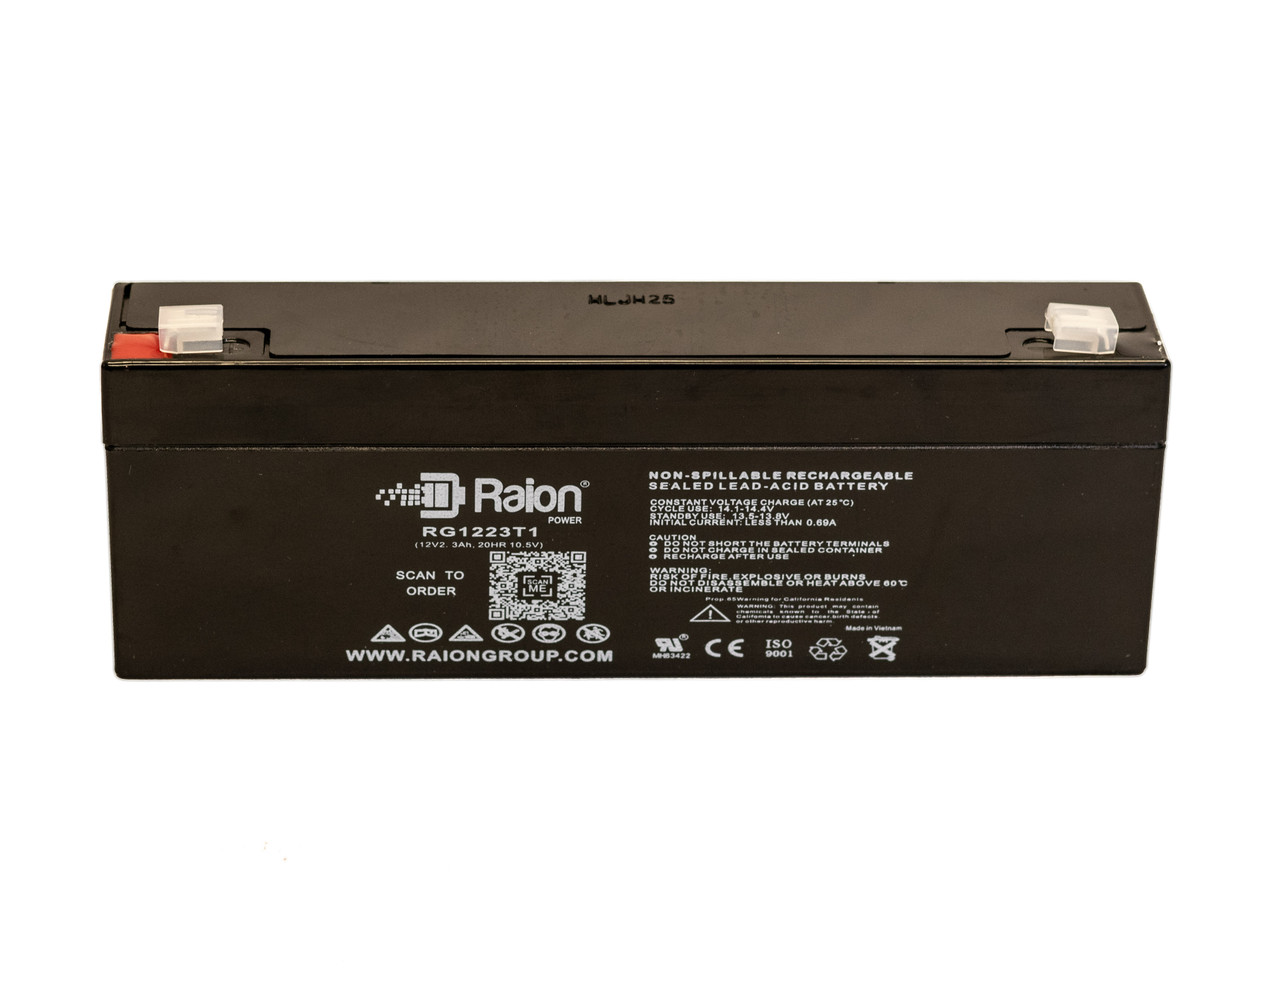 Raion Power 12V 2.3Ah SLA Battery With T1 Terminals For Life Science LS24 Monitor